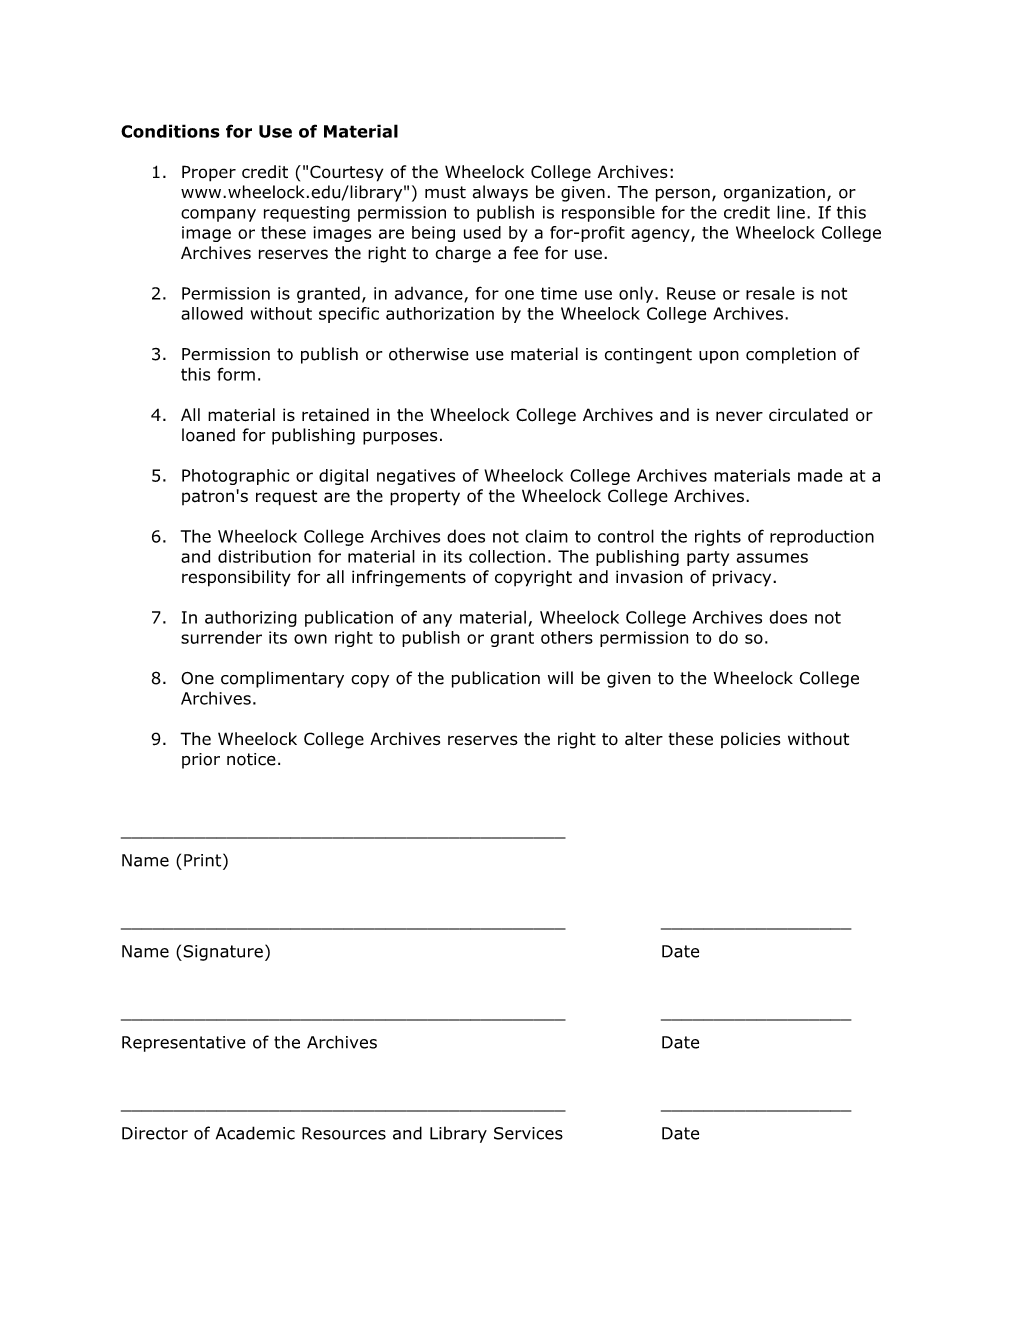 Wheelock College Library Archives Permission to Publish/Use Form